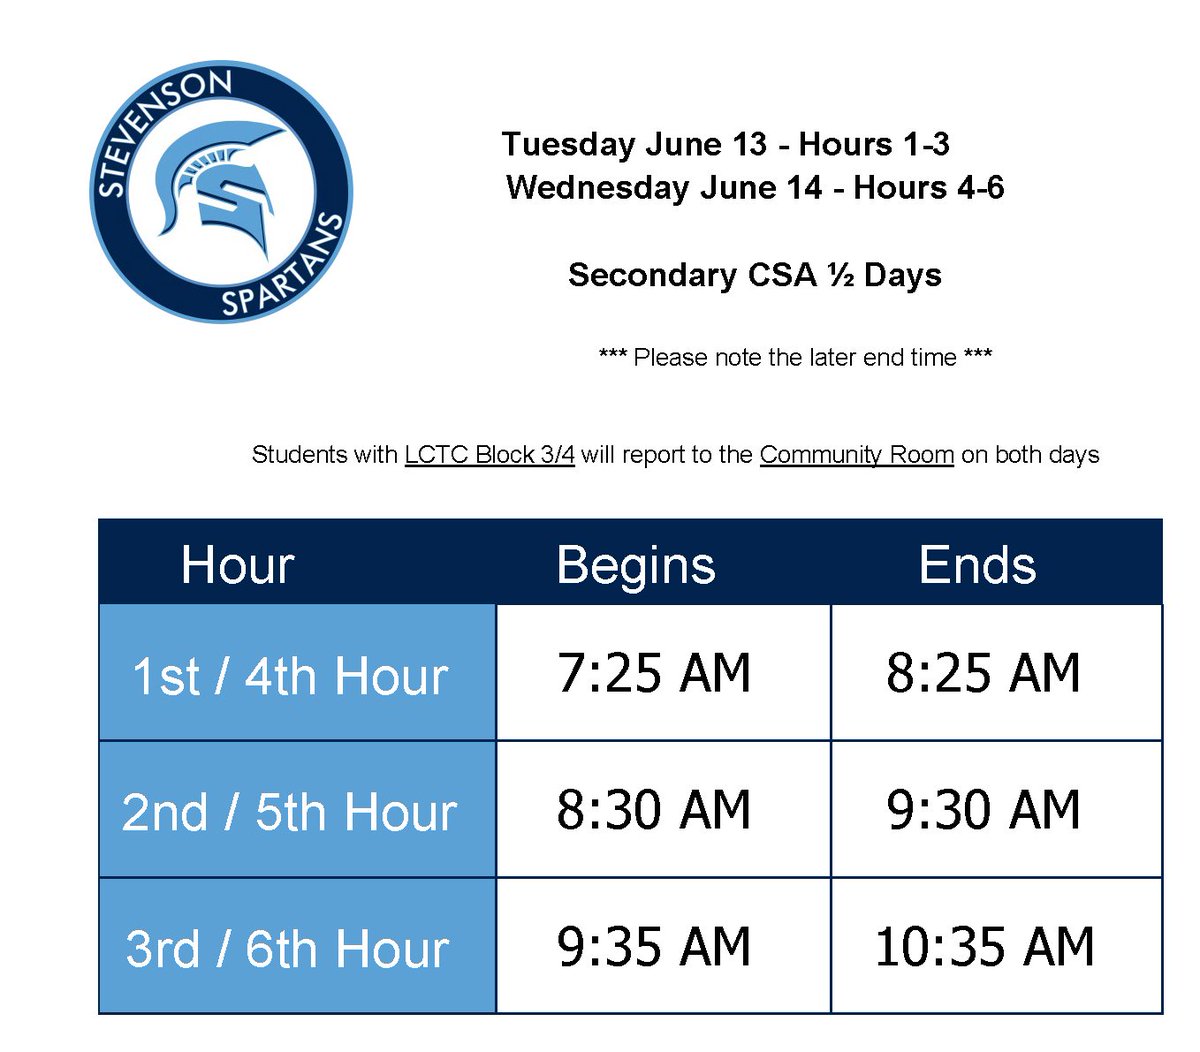 District Summative Common Assessments are coming up soon. Here's the half-day schedules for June 13 and June 14.